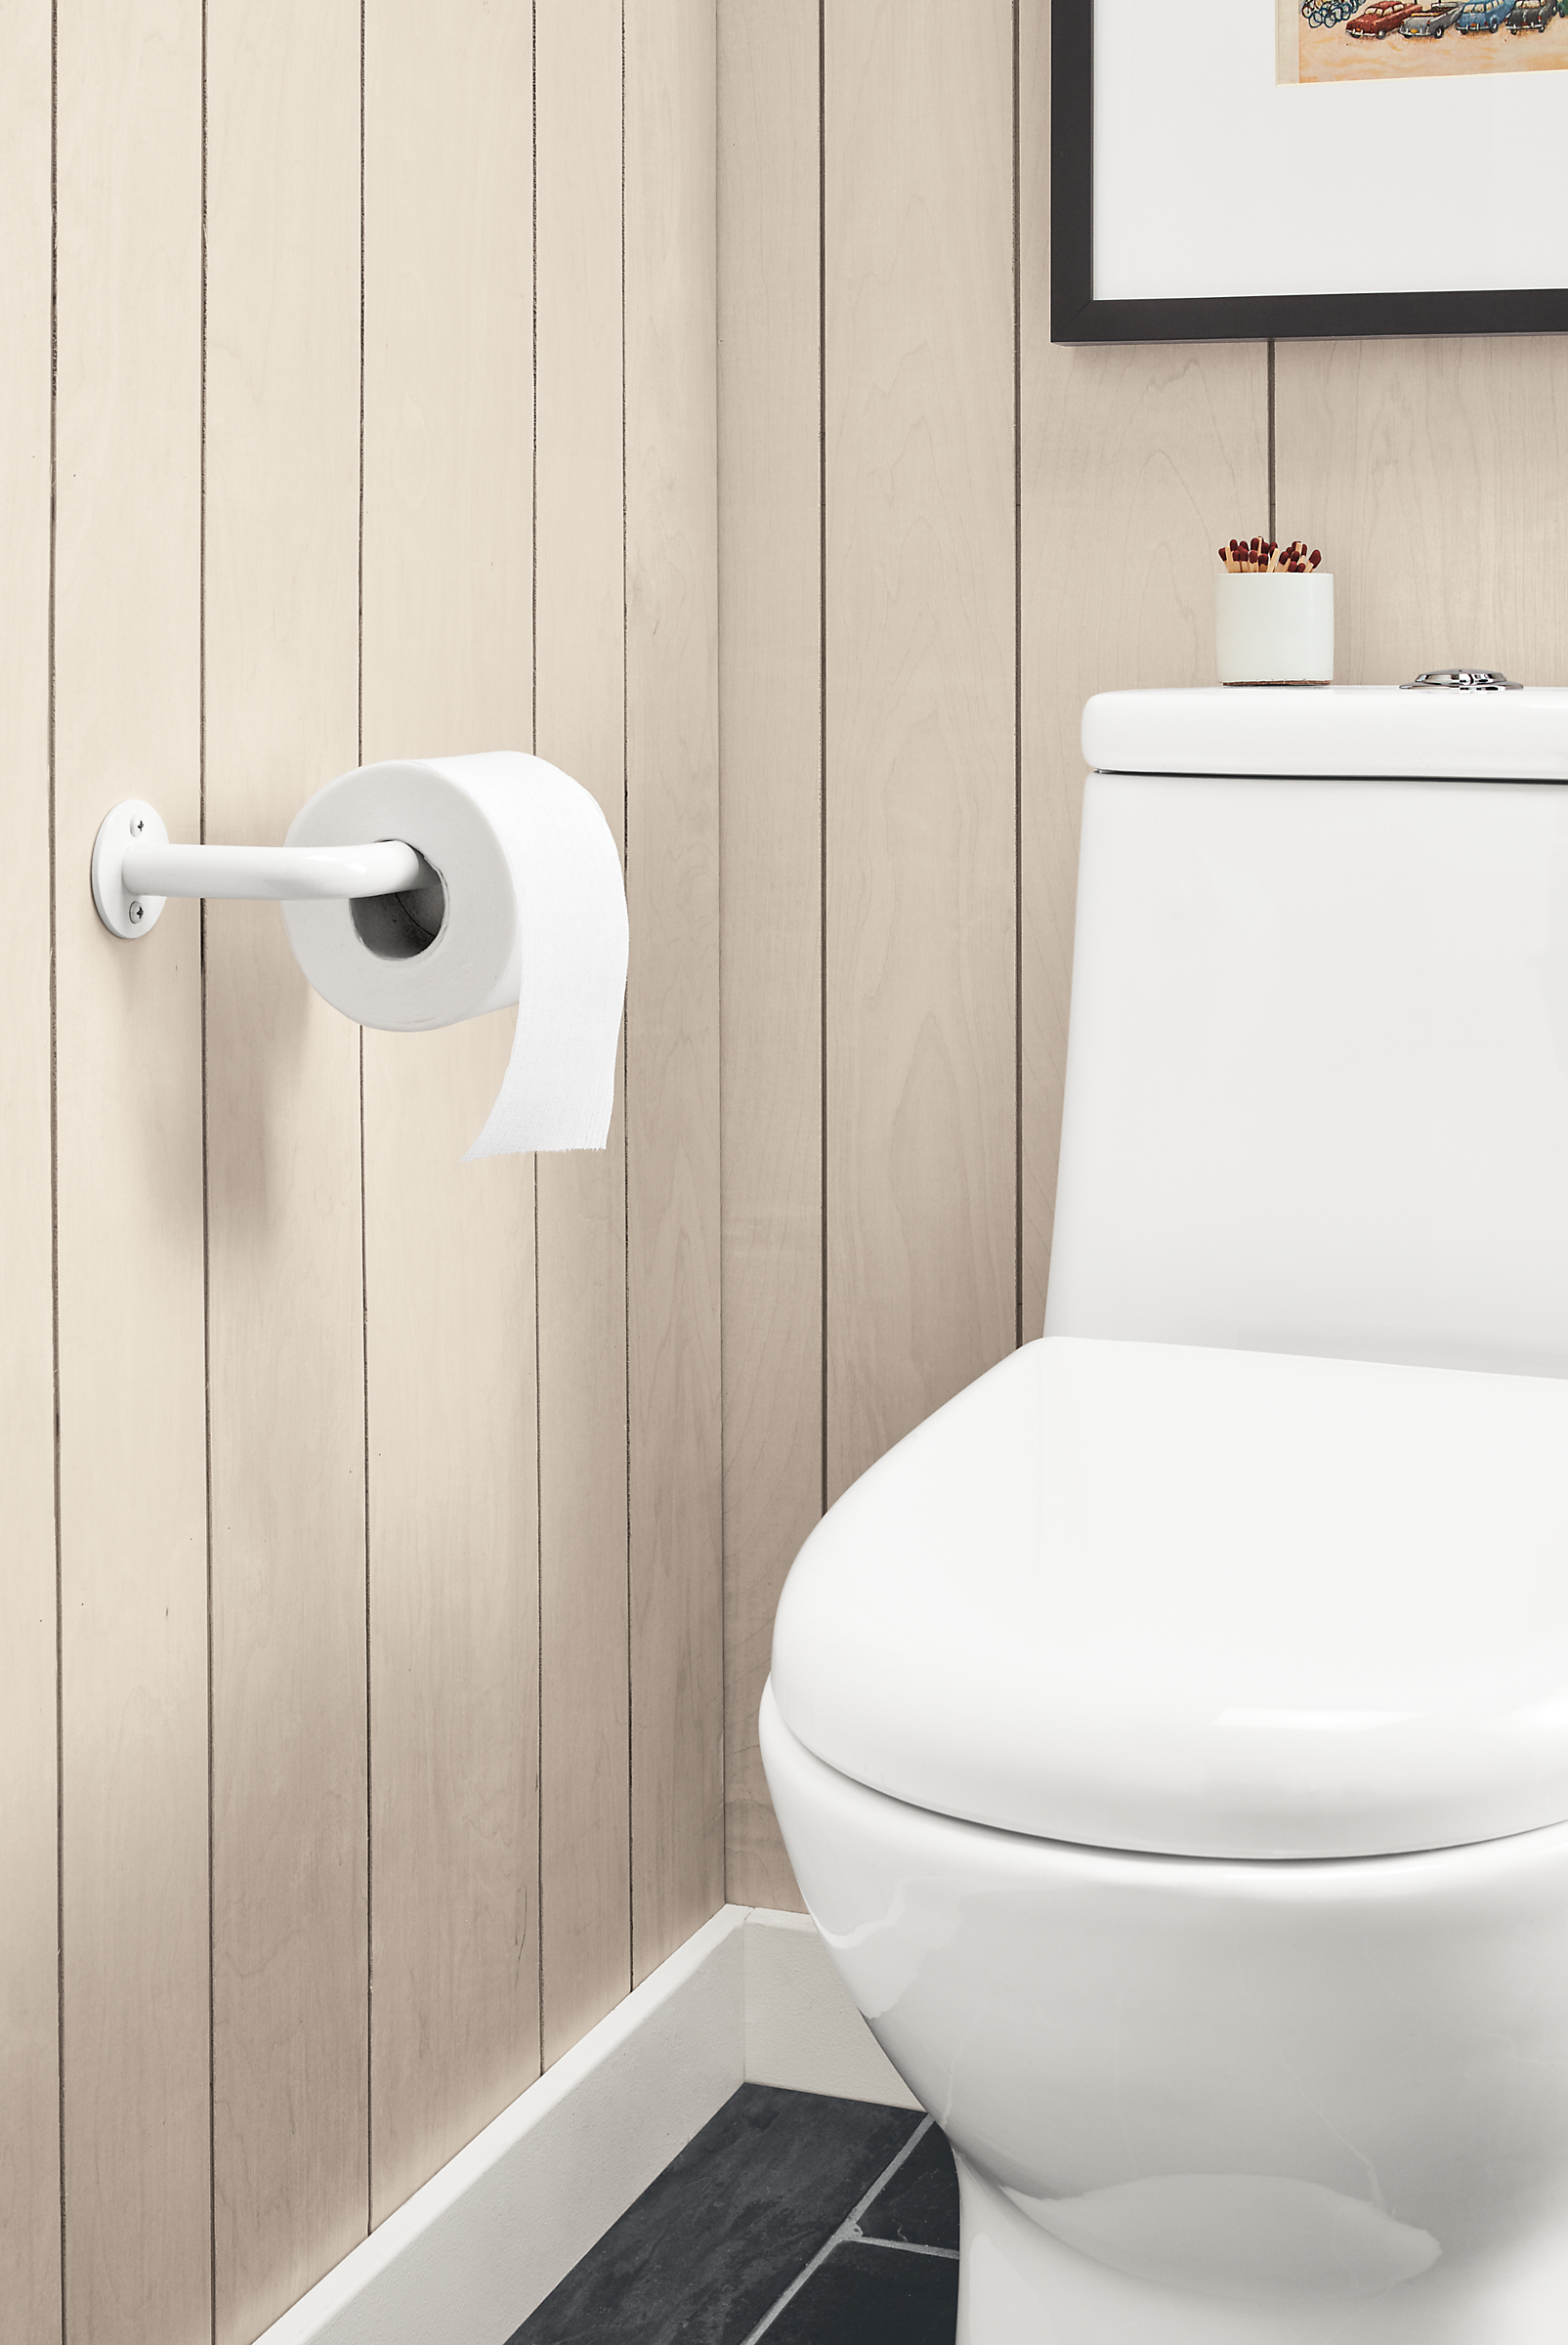 Detail of Filmore wall-mounted toilet paper holder in white.